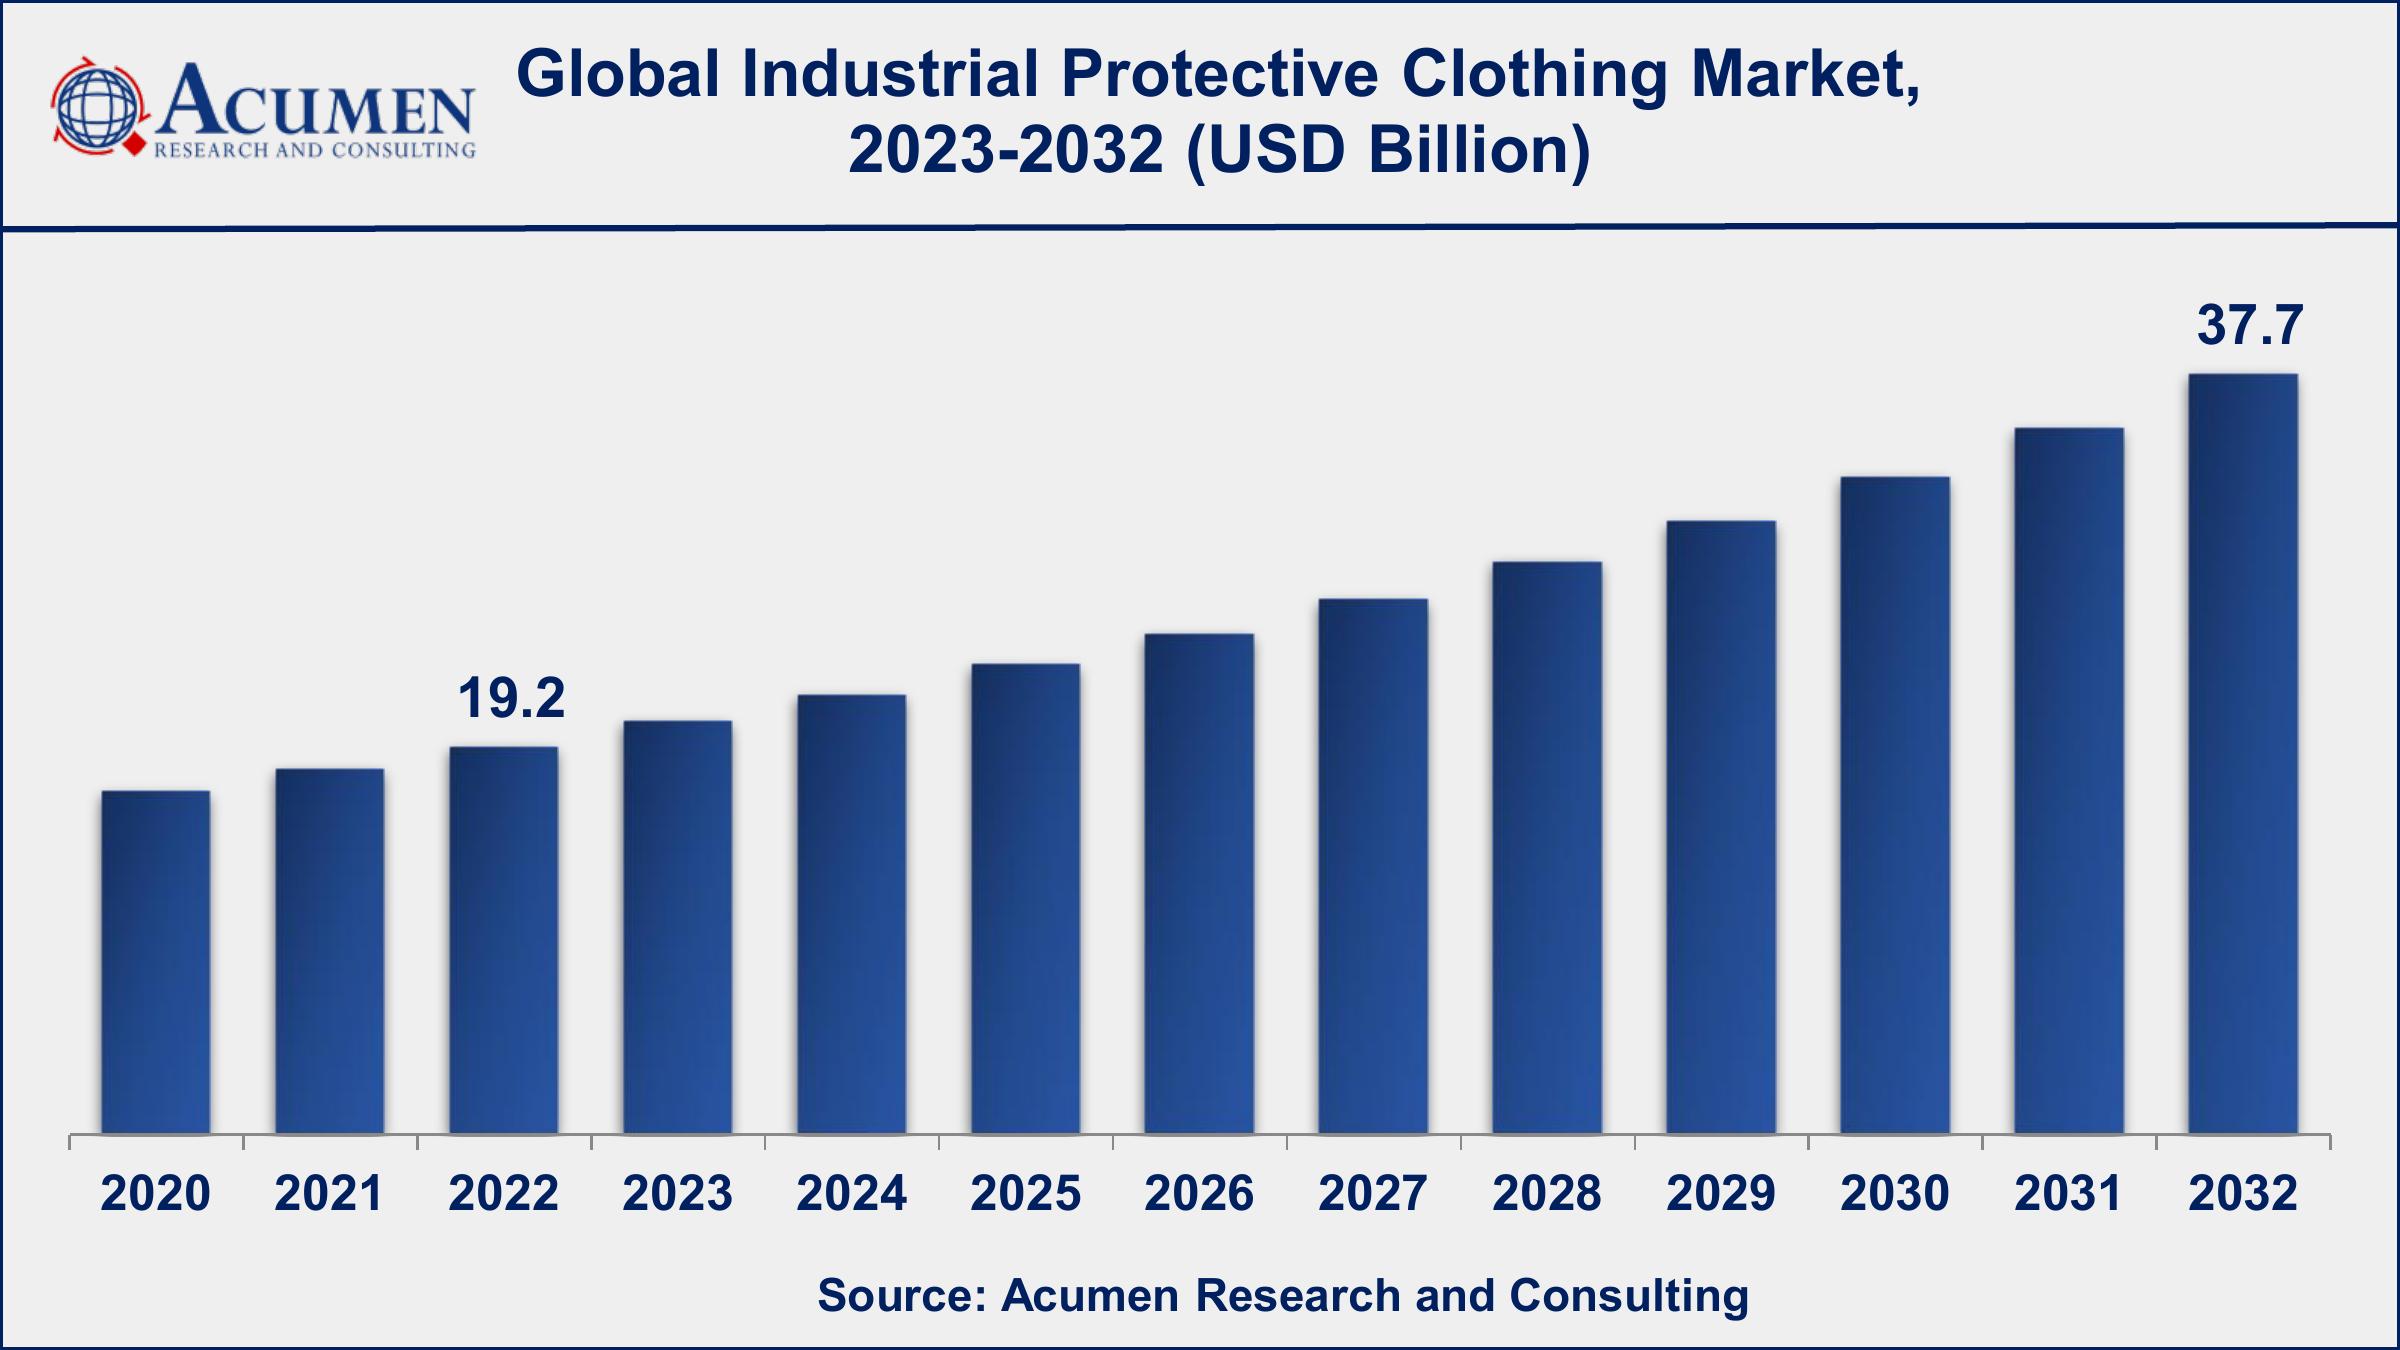 Global Industrial Protective Clothing Market Dynamics